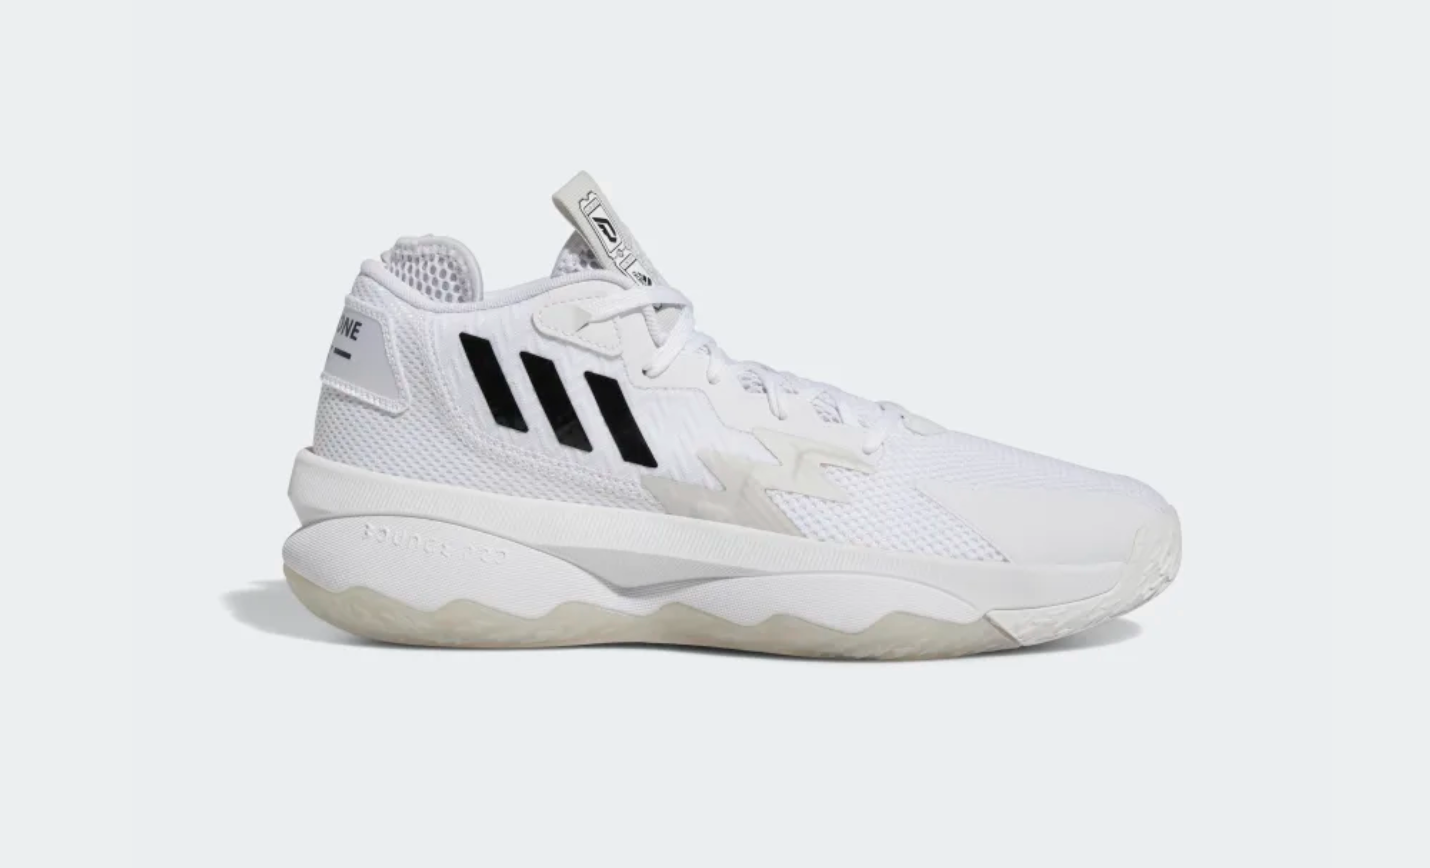 Damian Lillard 'Dame 8′ shoes on sale for $71 at Adidas to honor his  71-point performance 